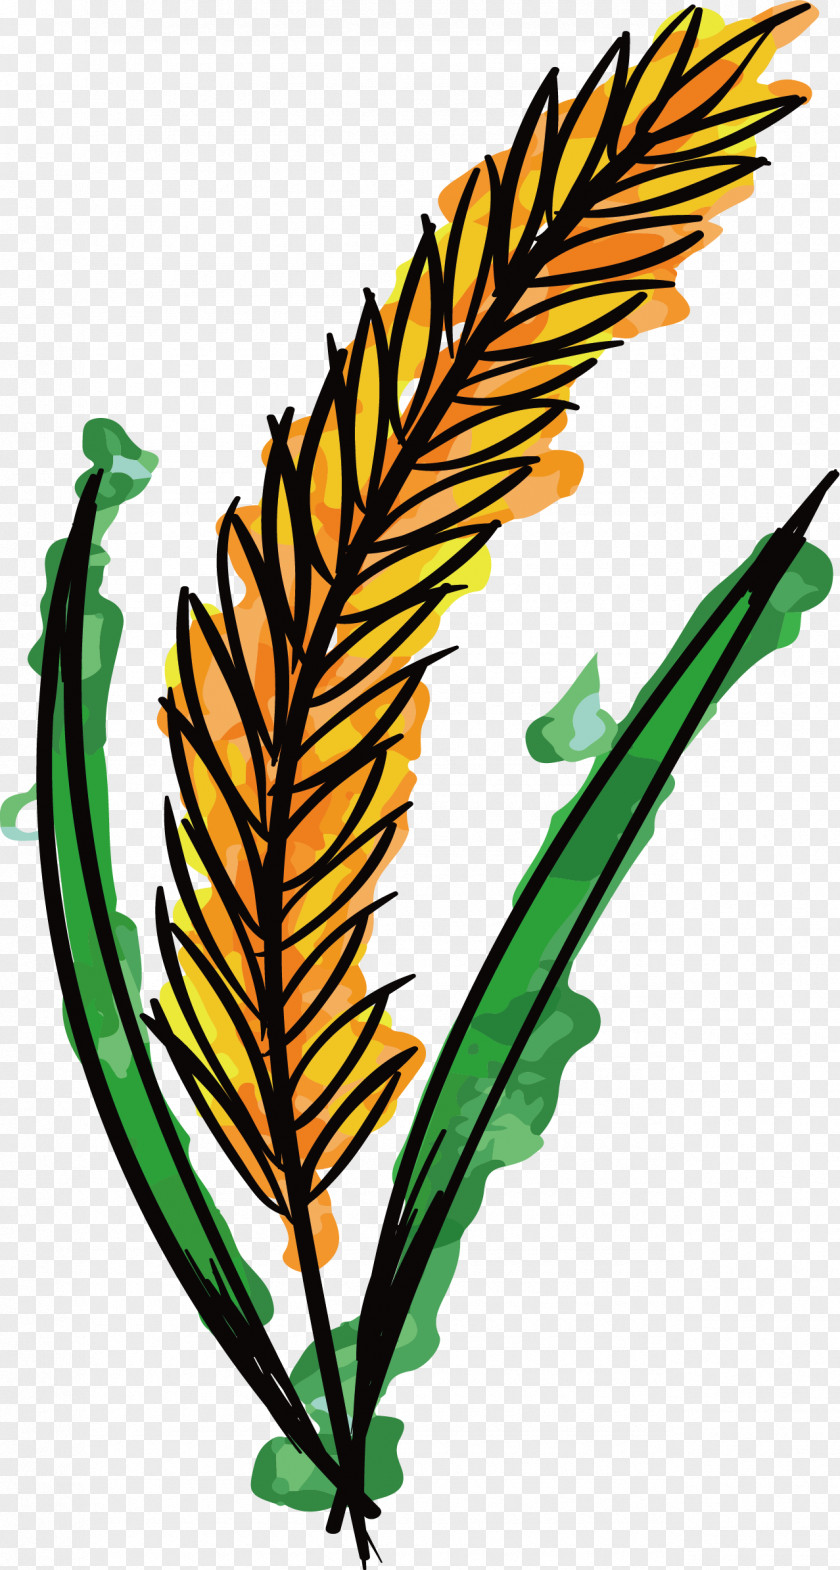 Hand-painted Wheat Watercolor Painting Clip Art PNG